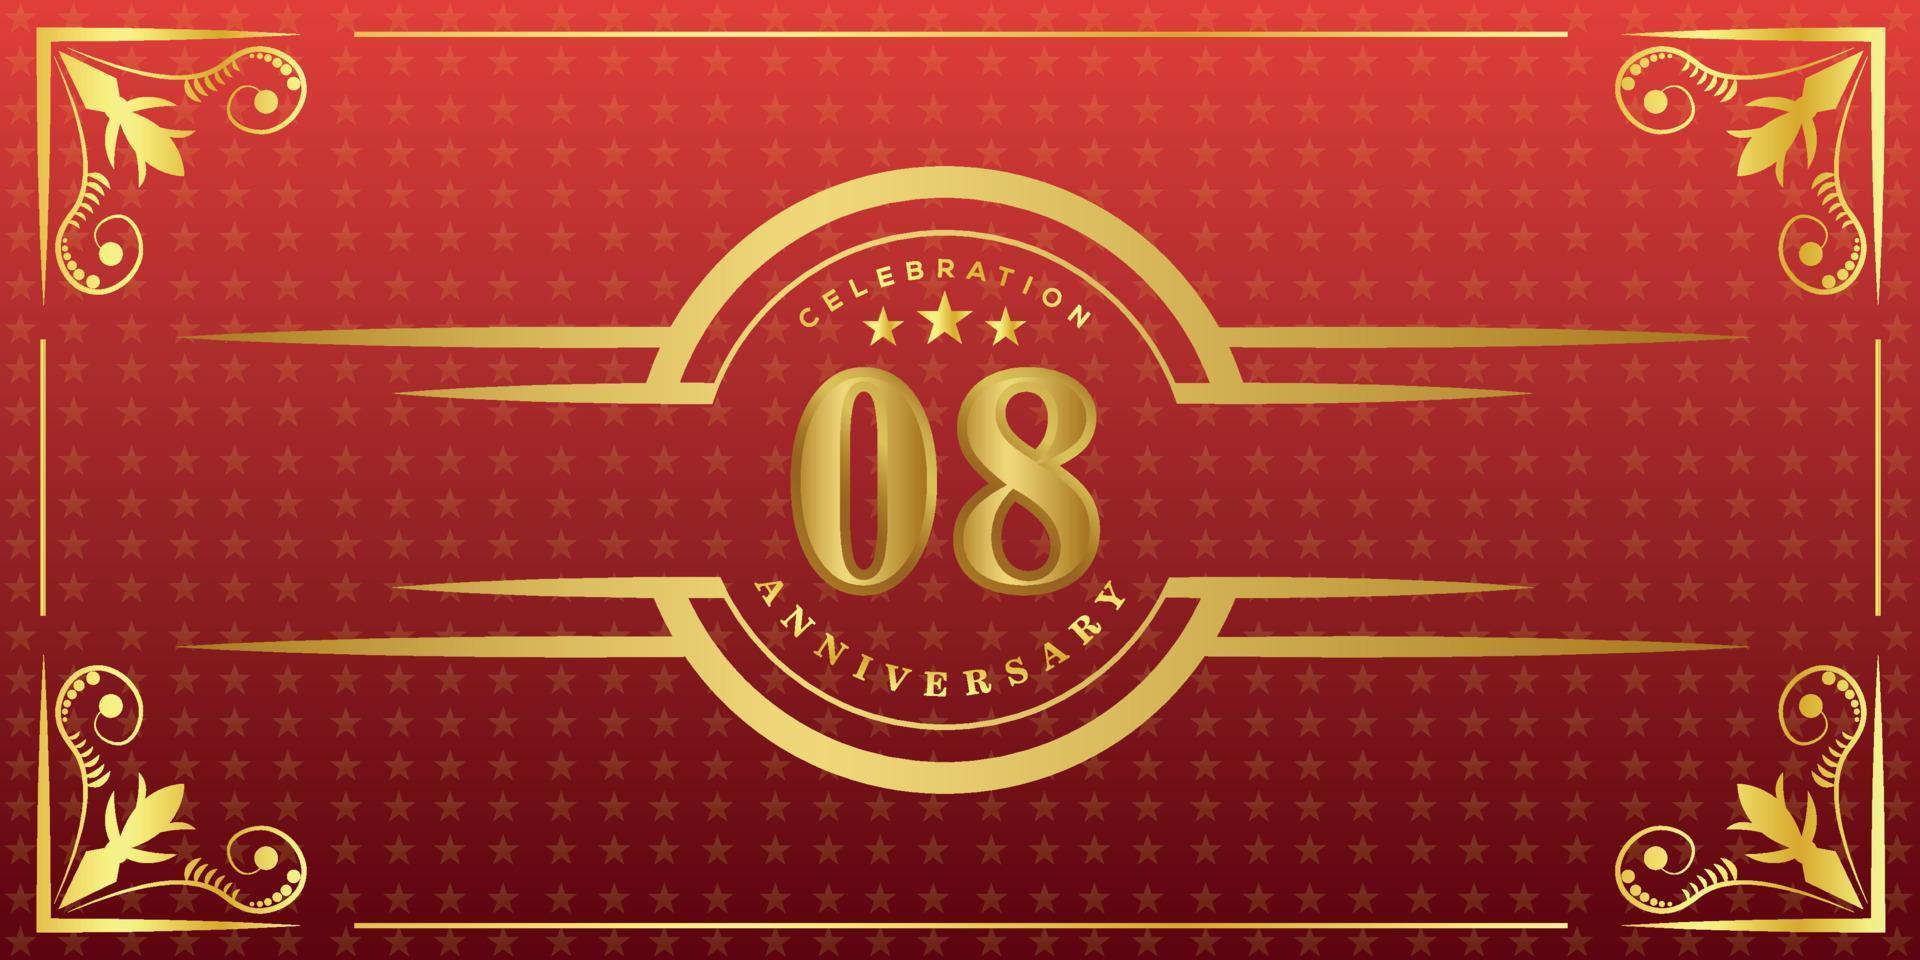 08th anniversary logo with golden ring, confetti and gold border isolated on elegant red background, sparkle, vector design for greeting card and invitation card